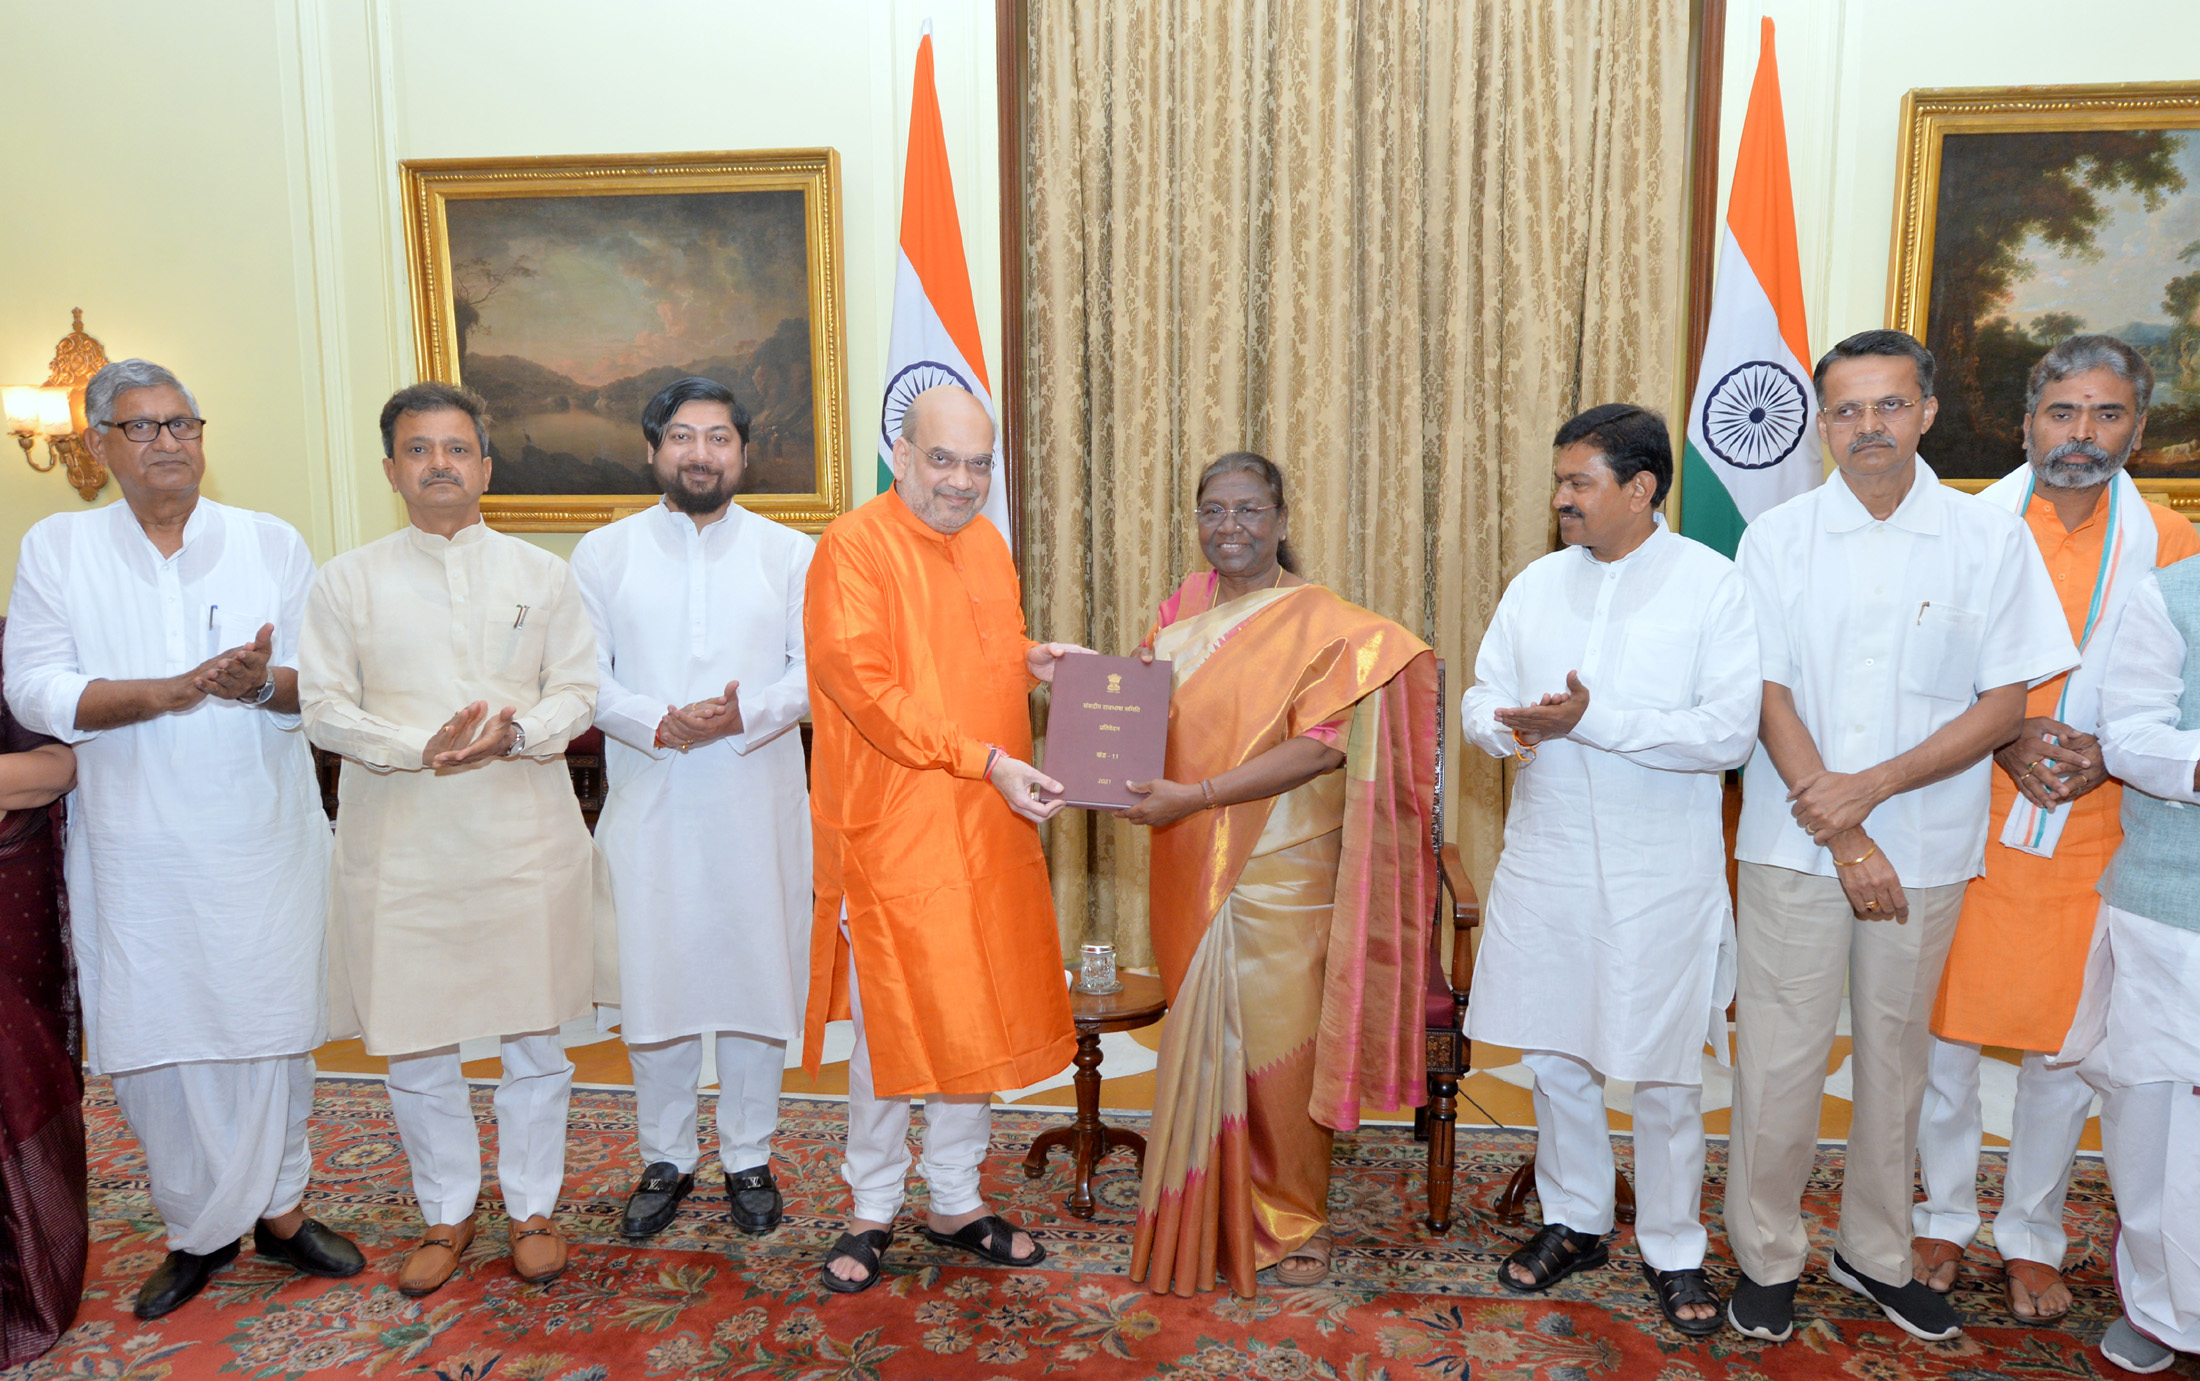 The Union Minister for Home Affairs and Cooperation Amit Shah and the members of the Committee of Parliament on Official Languages submitted the 11th Report of the Committee of Parliament on Official Languages to the President, Smt. Droupadi Murmu, in New Delhi on September 09, 2022. (PIB)